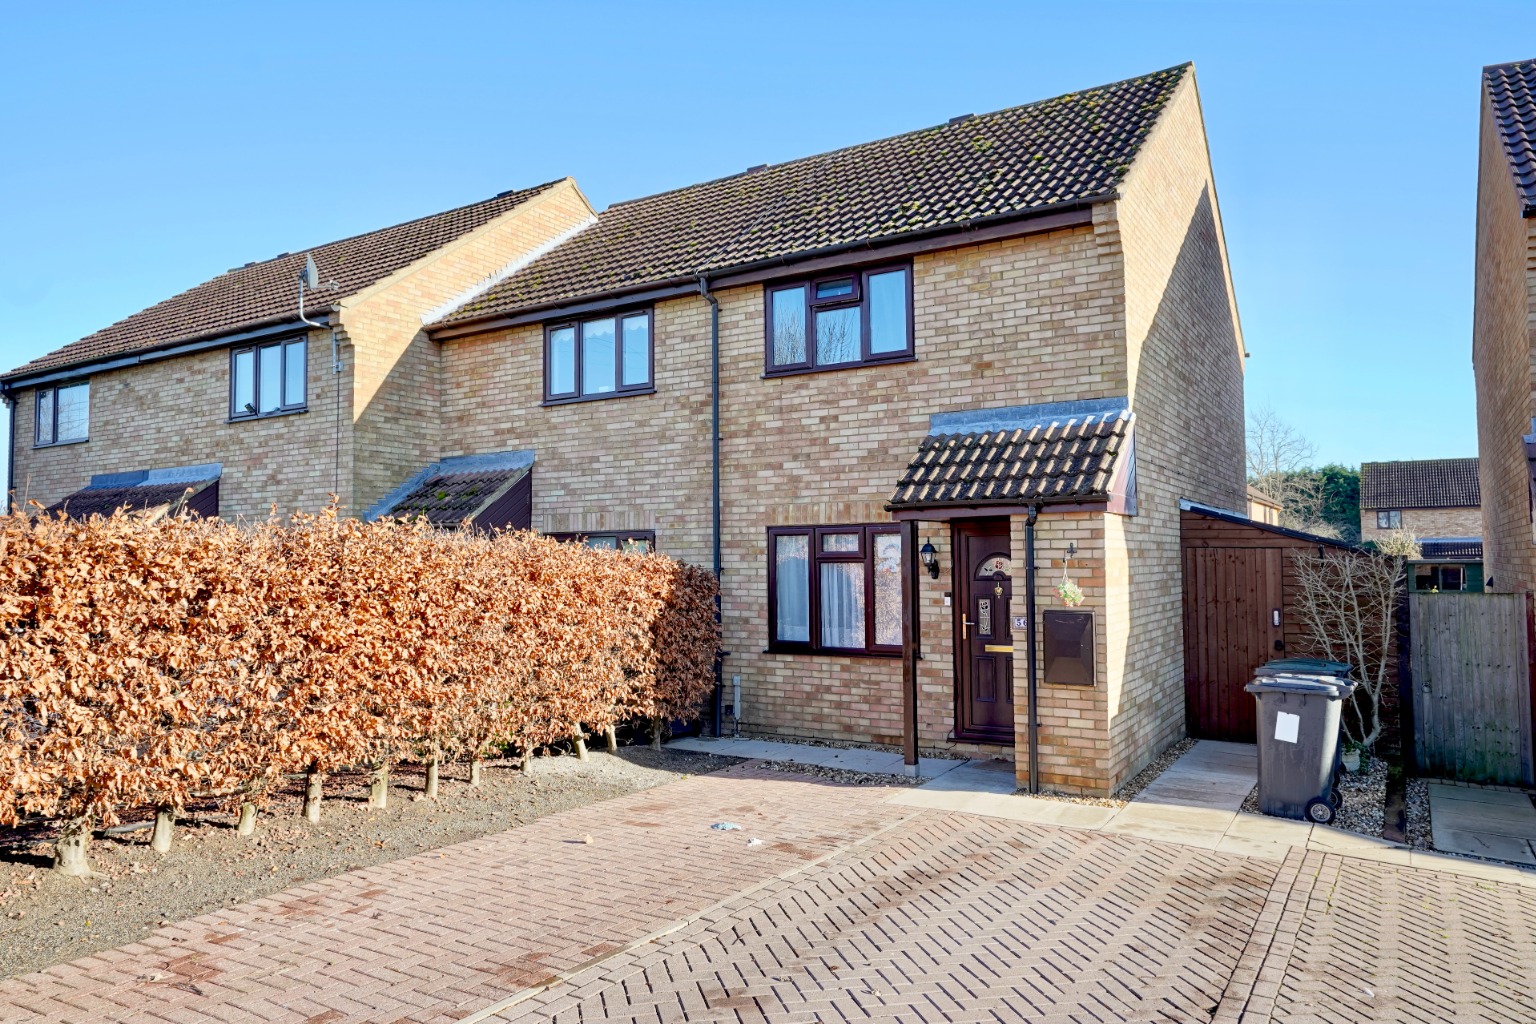 We're pleased to offer for sale this fantastic three bedroom end of terrace home. This home is situated on Rookery Road, a non-estate residence situated within a semi-rural setting. The location offers fantastic access to the A1, and is within close proximity to St Neots.